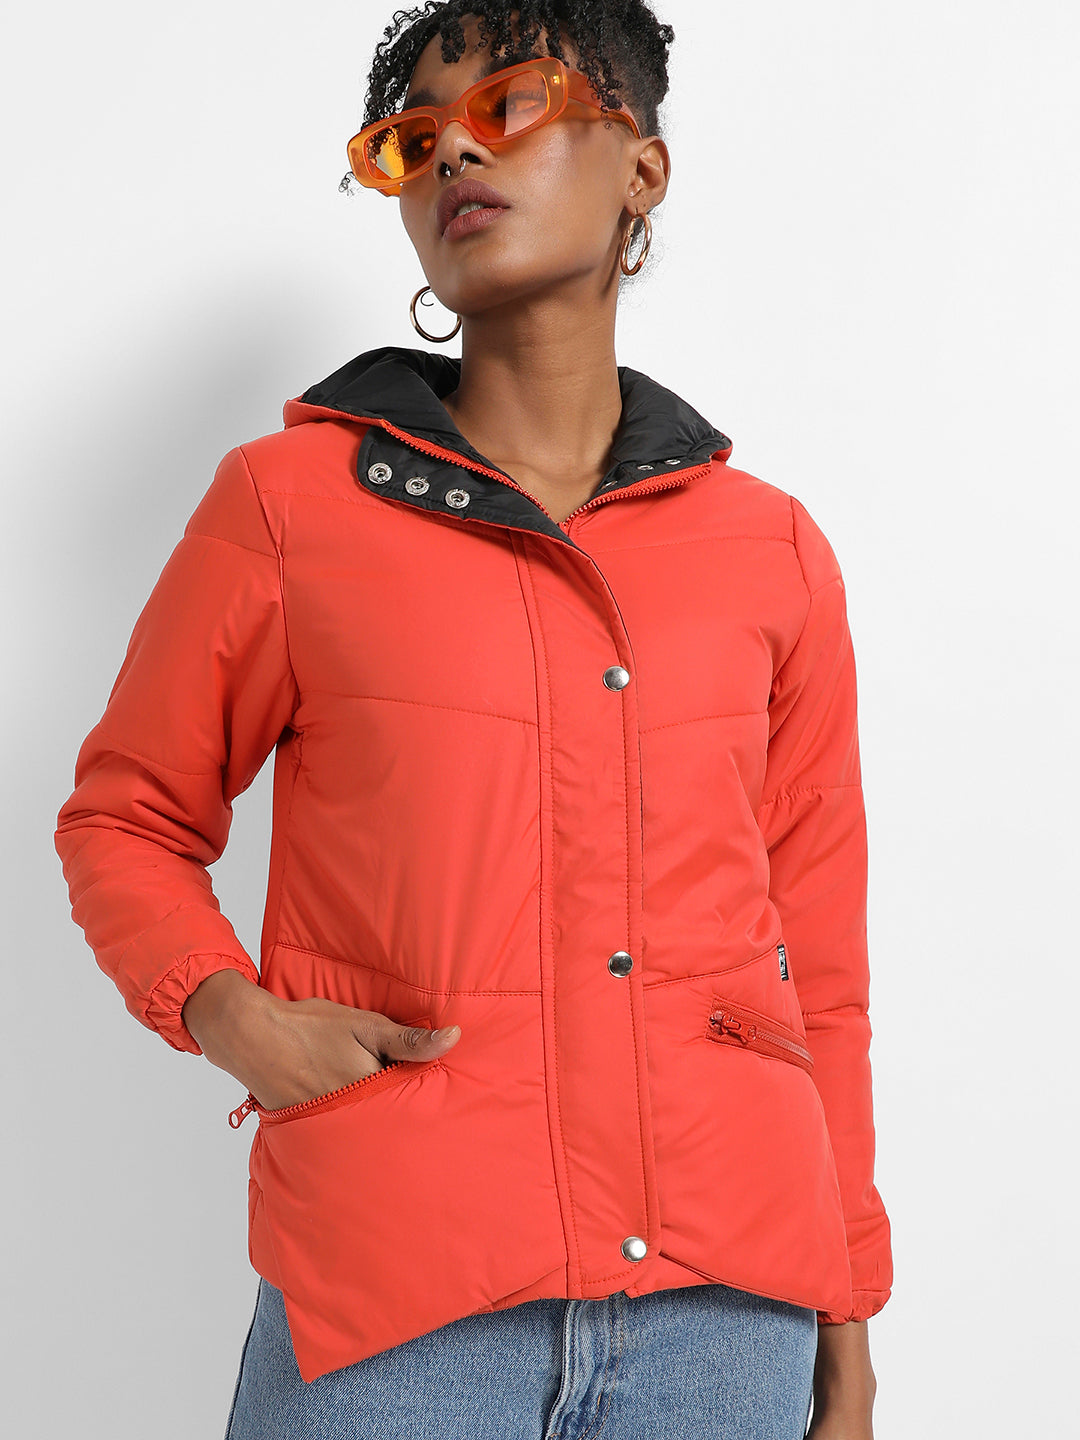 Quilted Puffer Jacket With Zipper Insert Pockets